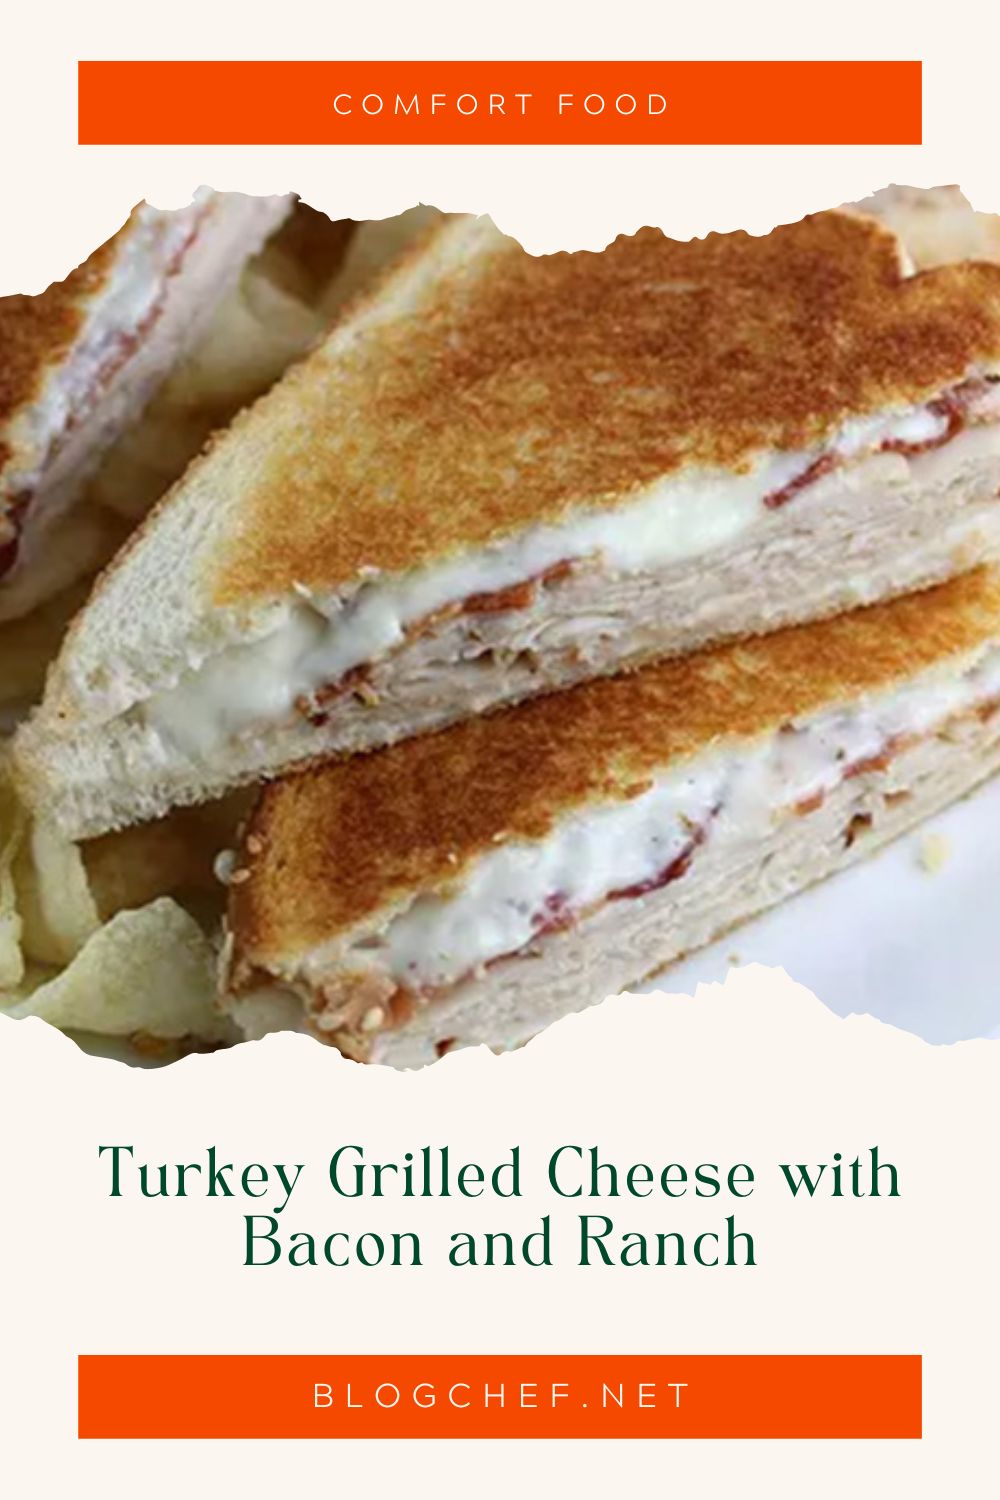 Turkey grilled cheese with bacon and ranch. 